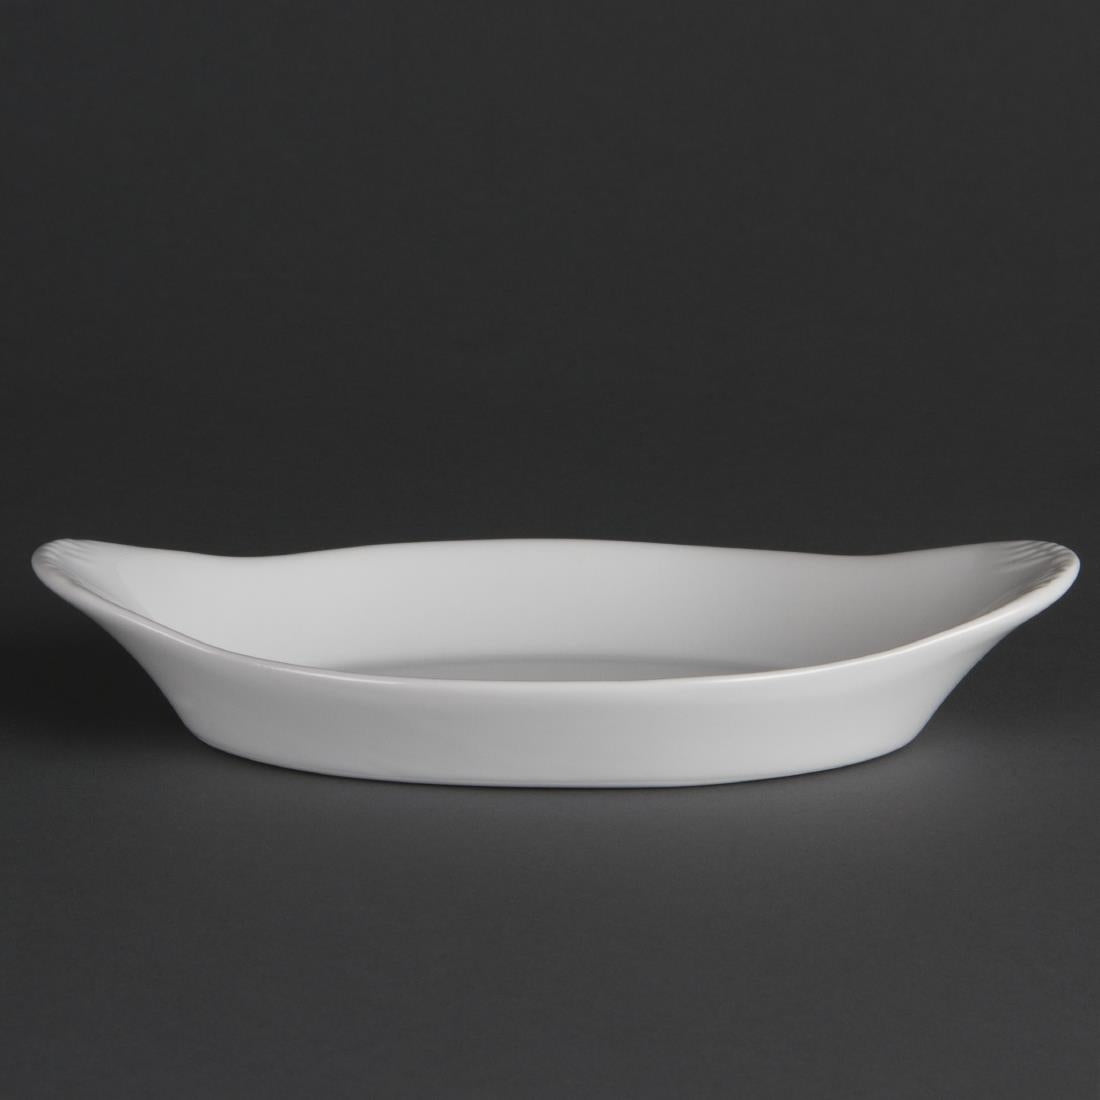 W427 Olympia Whiteware Oval Eared Dishes 229x 127mm (Pack of 6)